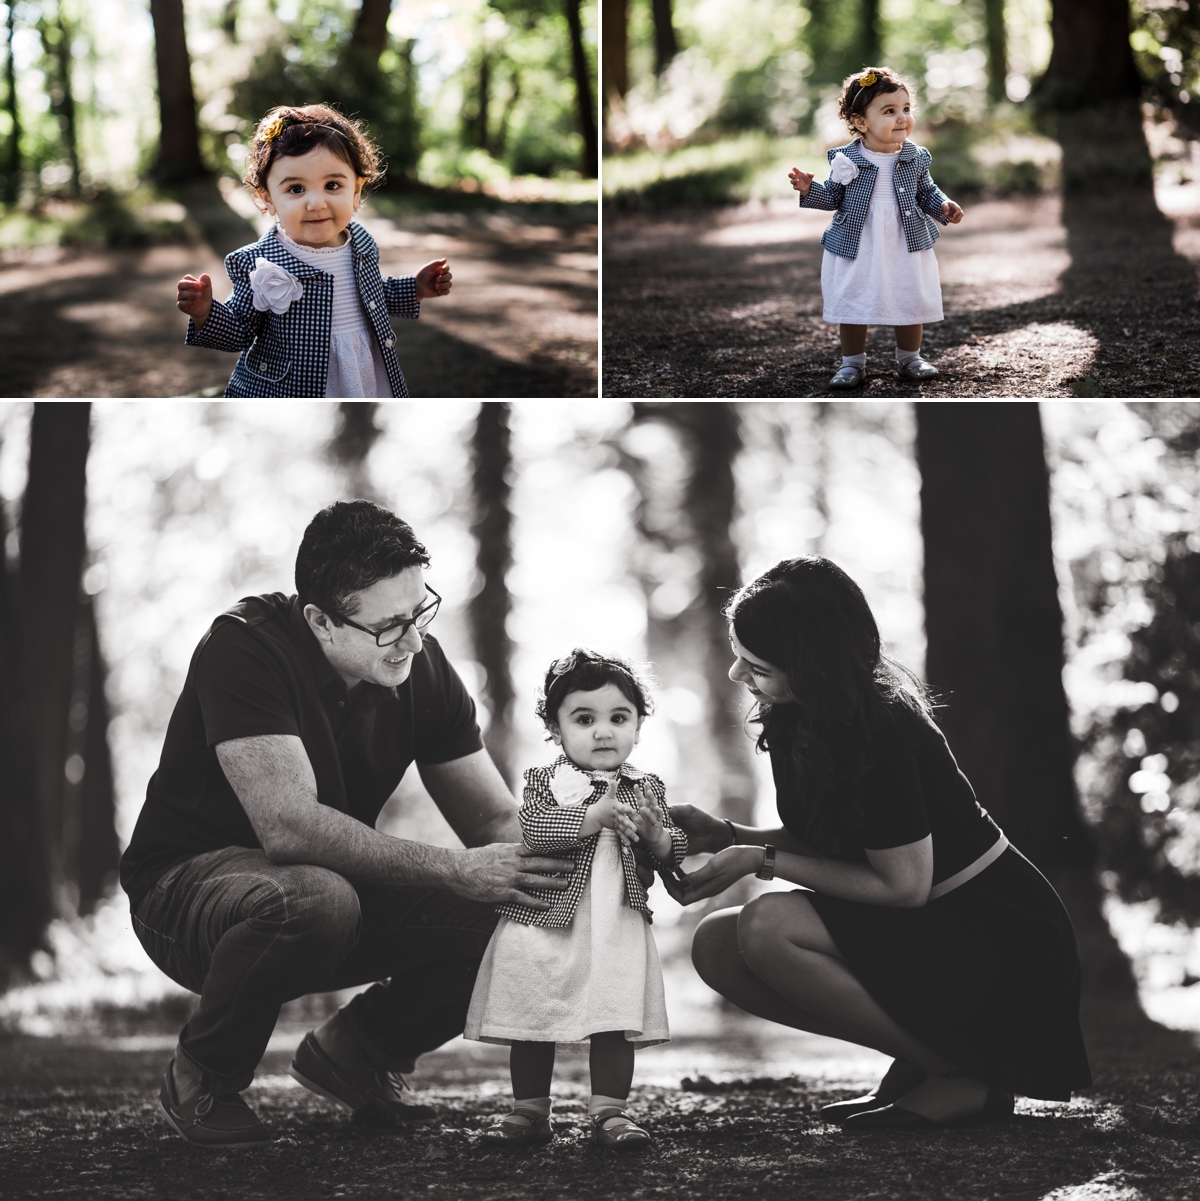 lifestyle family photography seattle photographer elena s blair outdoors on location